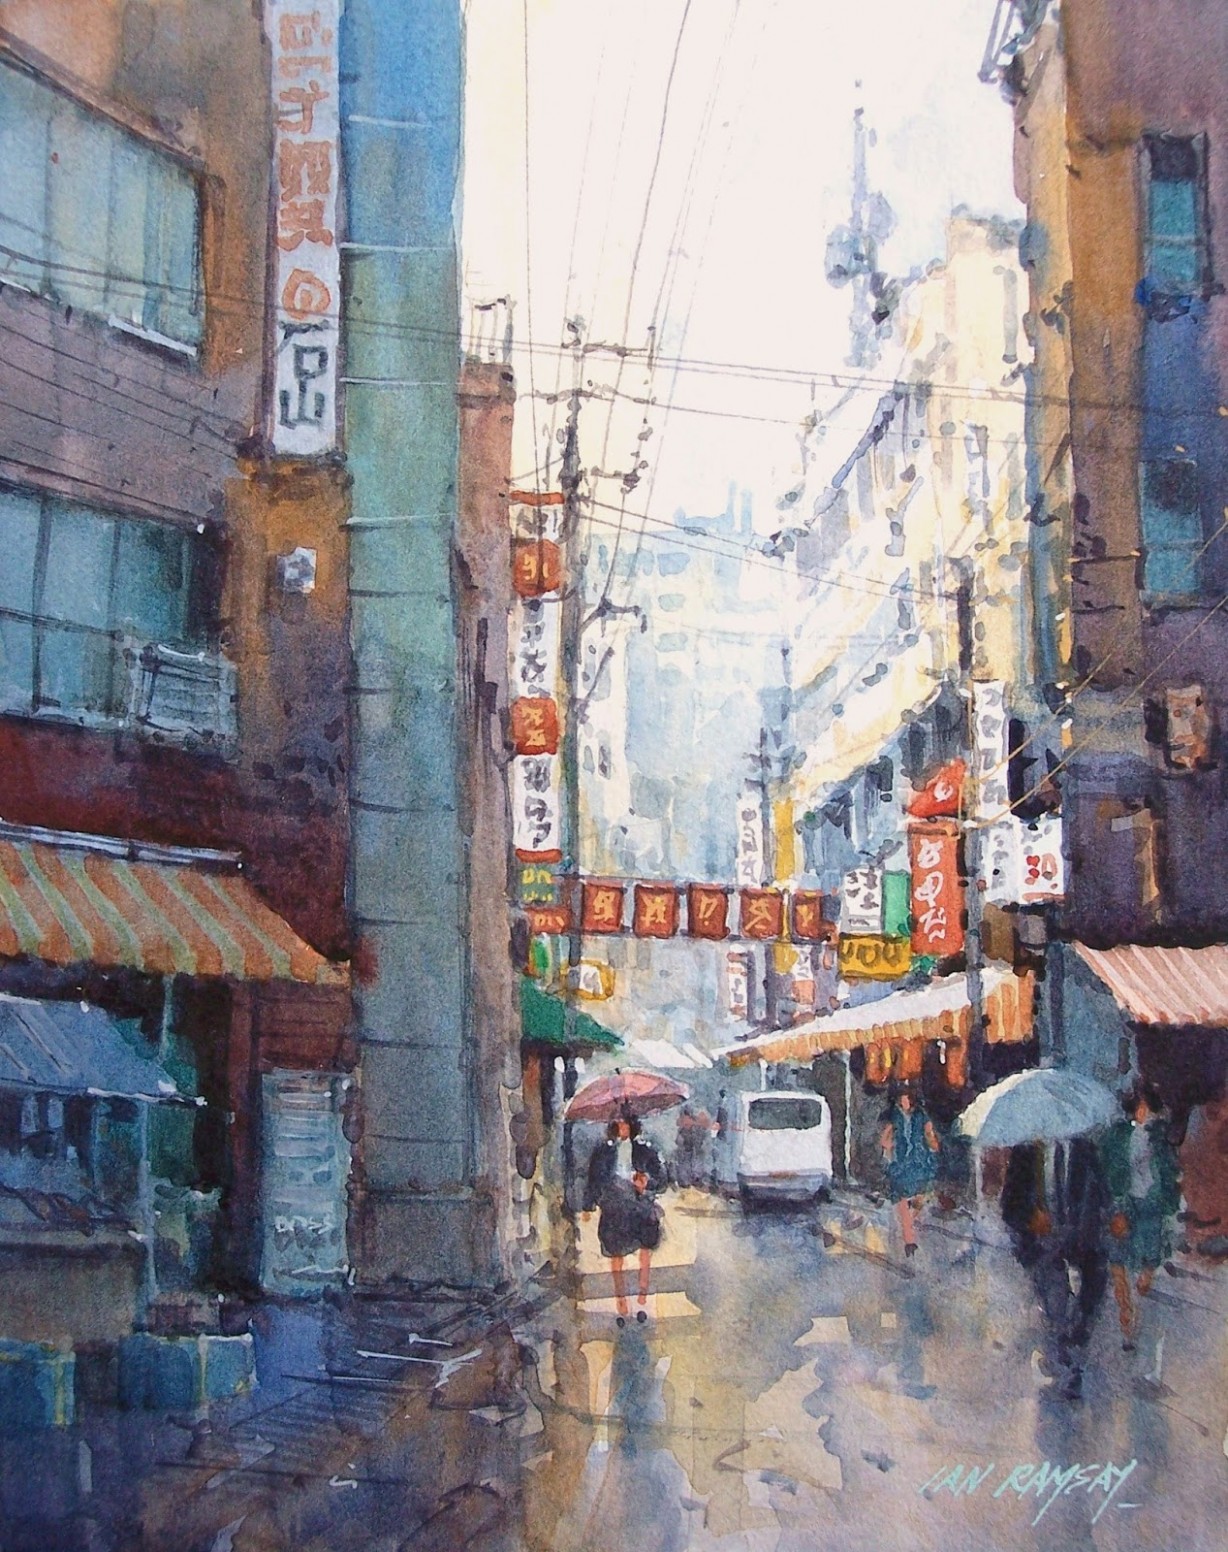 Ian Ramsay Watercolors: Painting Is A Different Experience ..